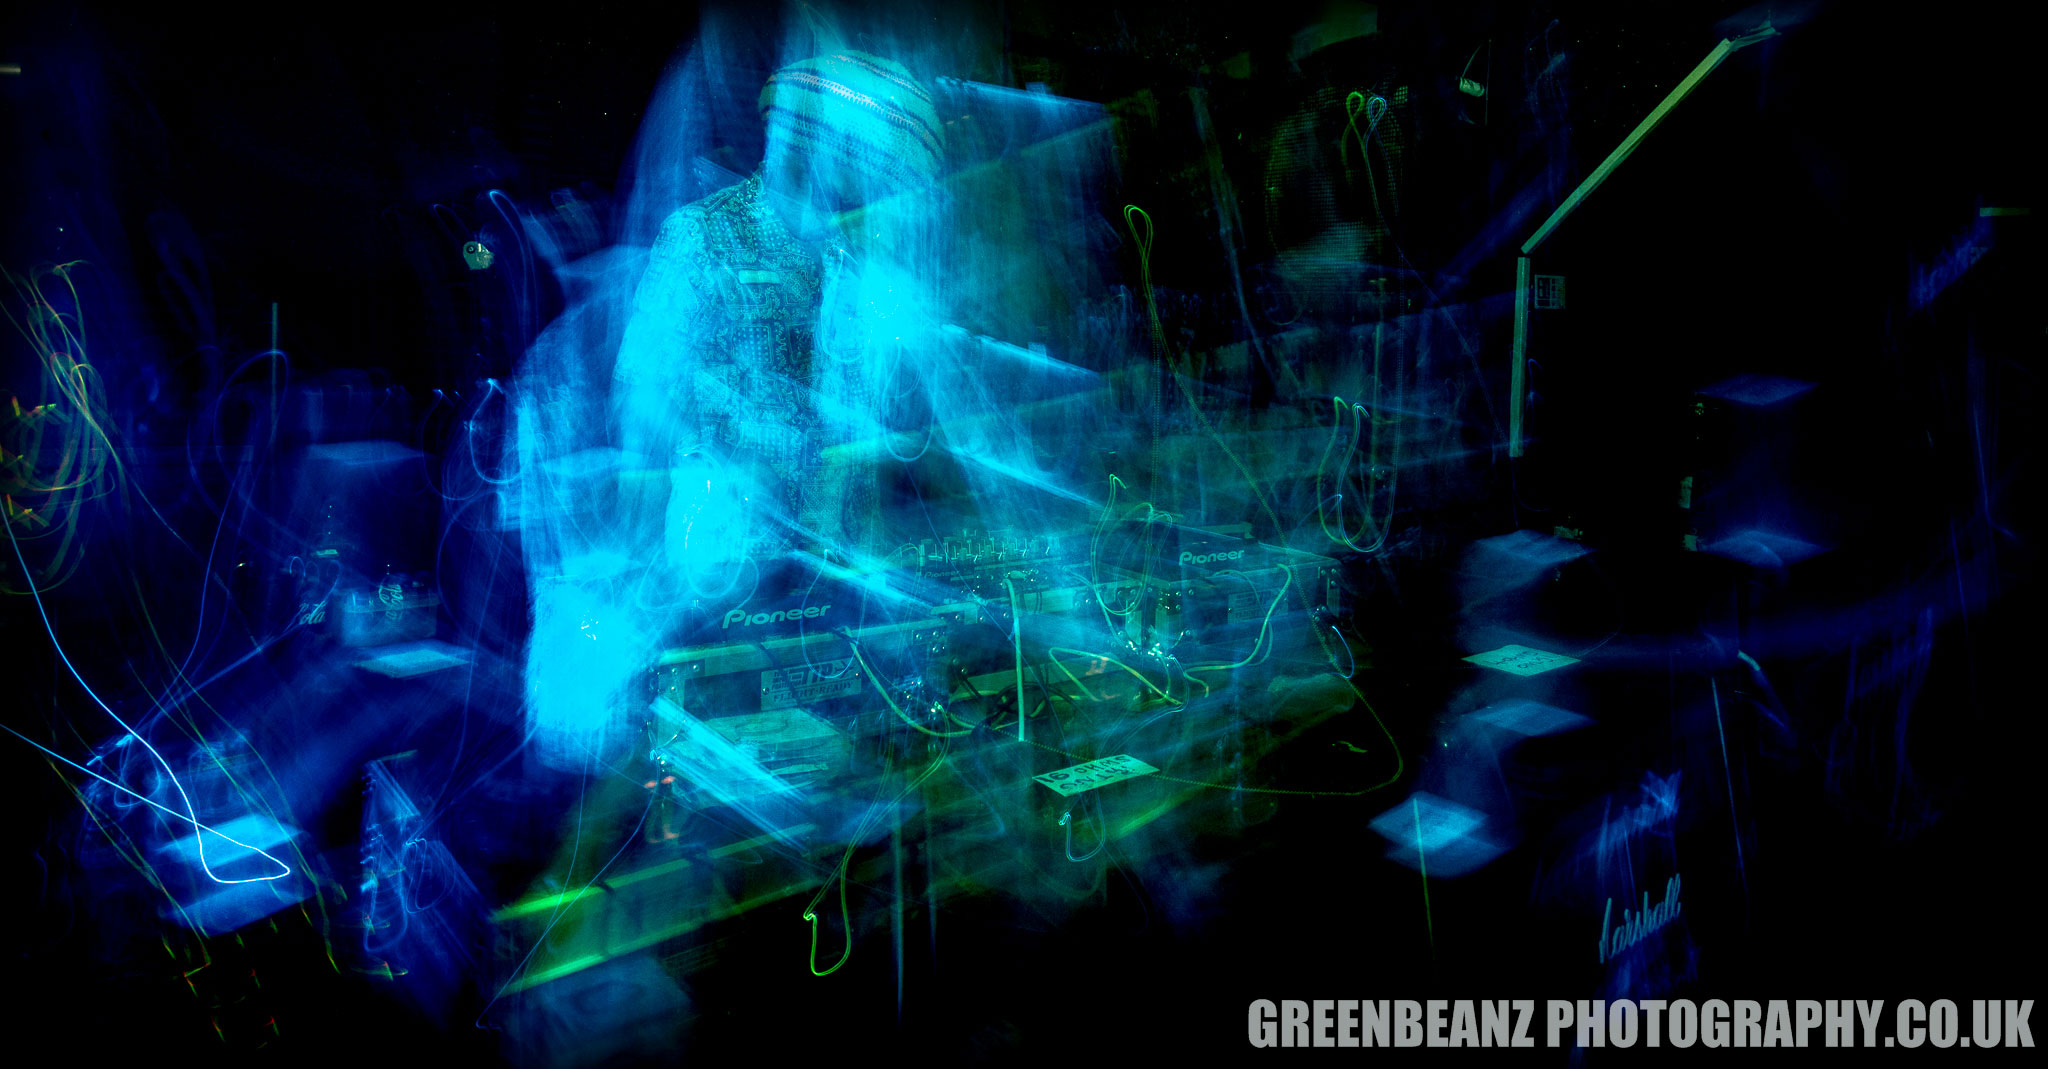 Long Exposure in camera photograph of Dub DJ Don Letts playing live in the UK